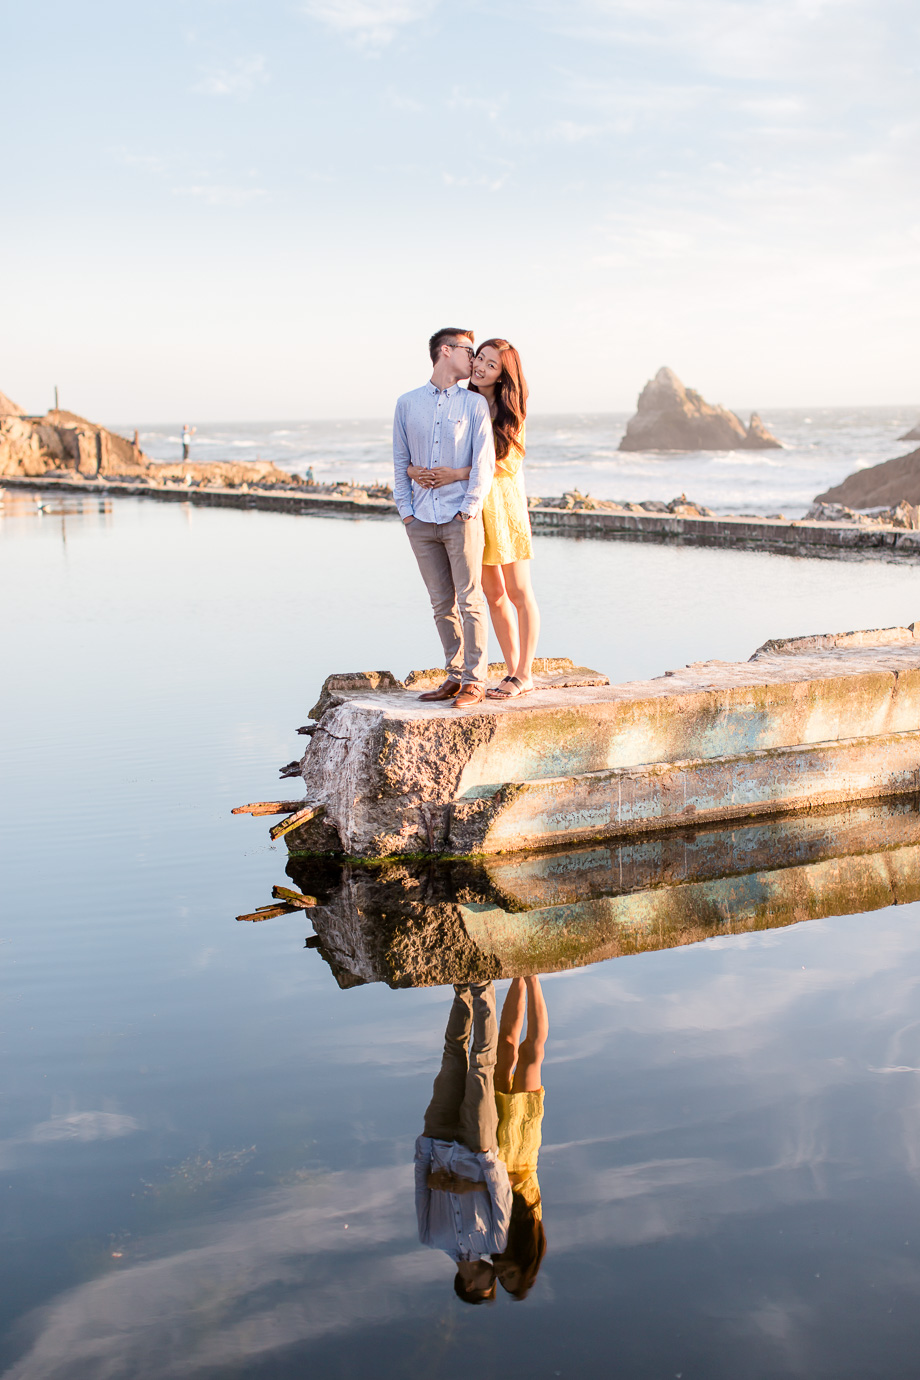 lands end sunset waterfront engagement photo with reflection